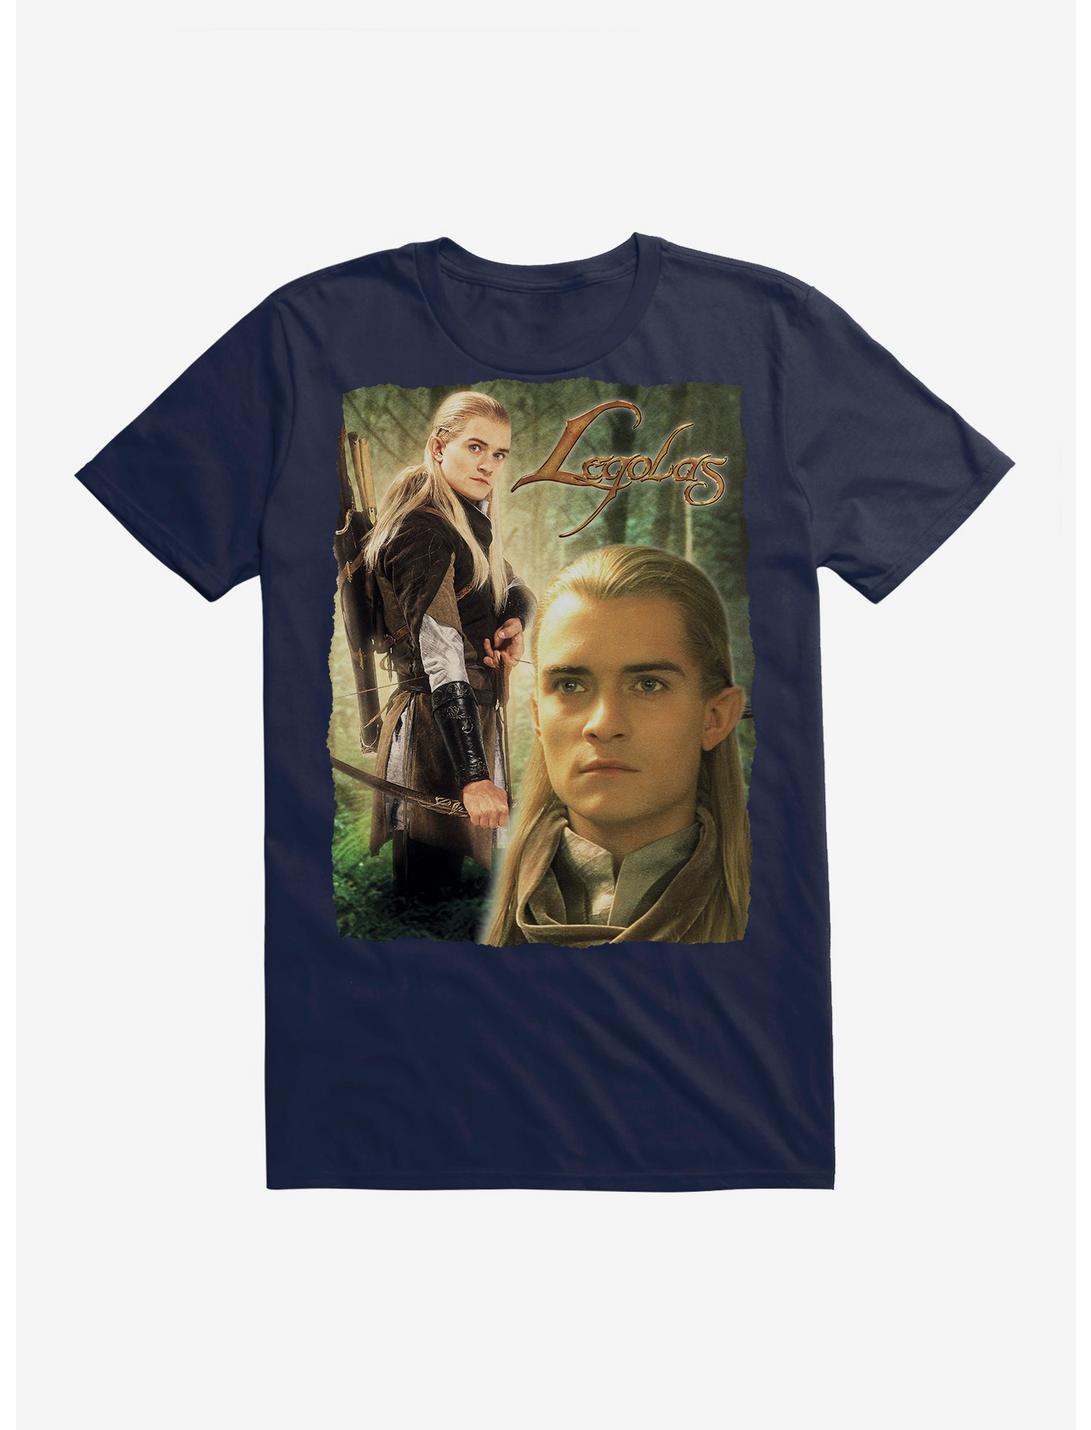 The Lord Of The Rings Legolas T-Shirt, MIDNIGHT NAVY, hi-res